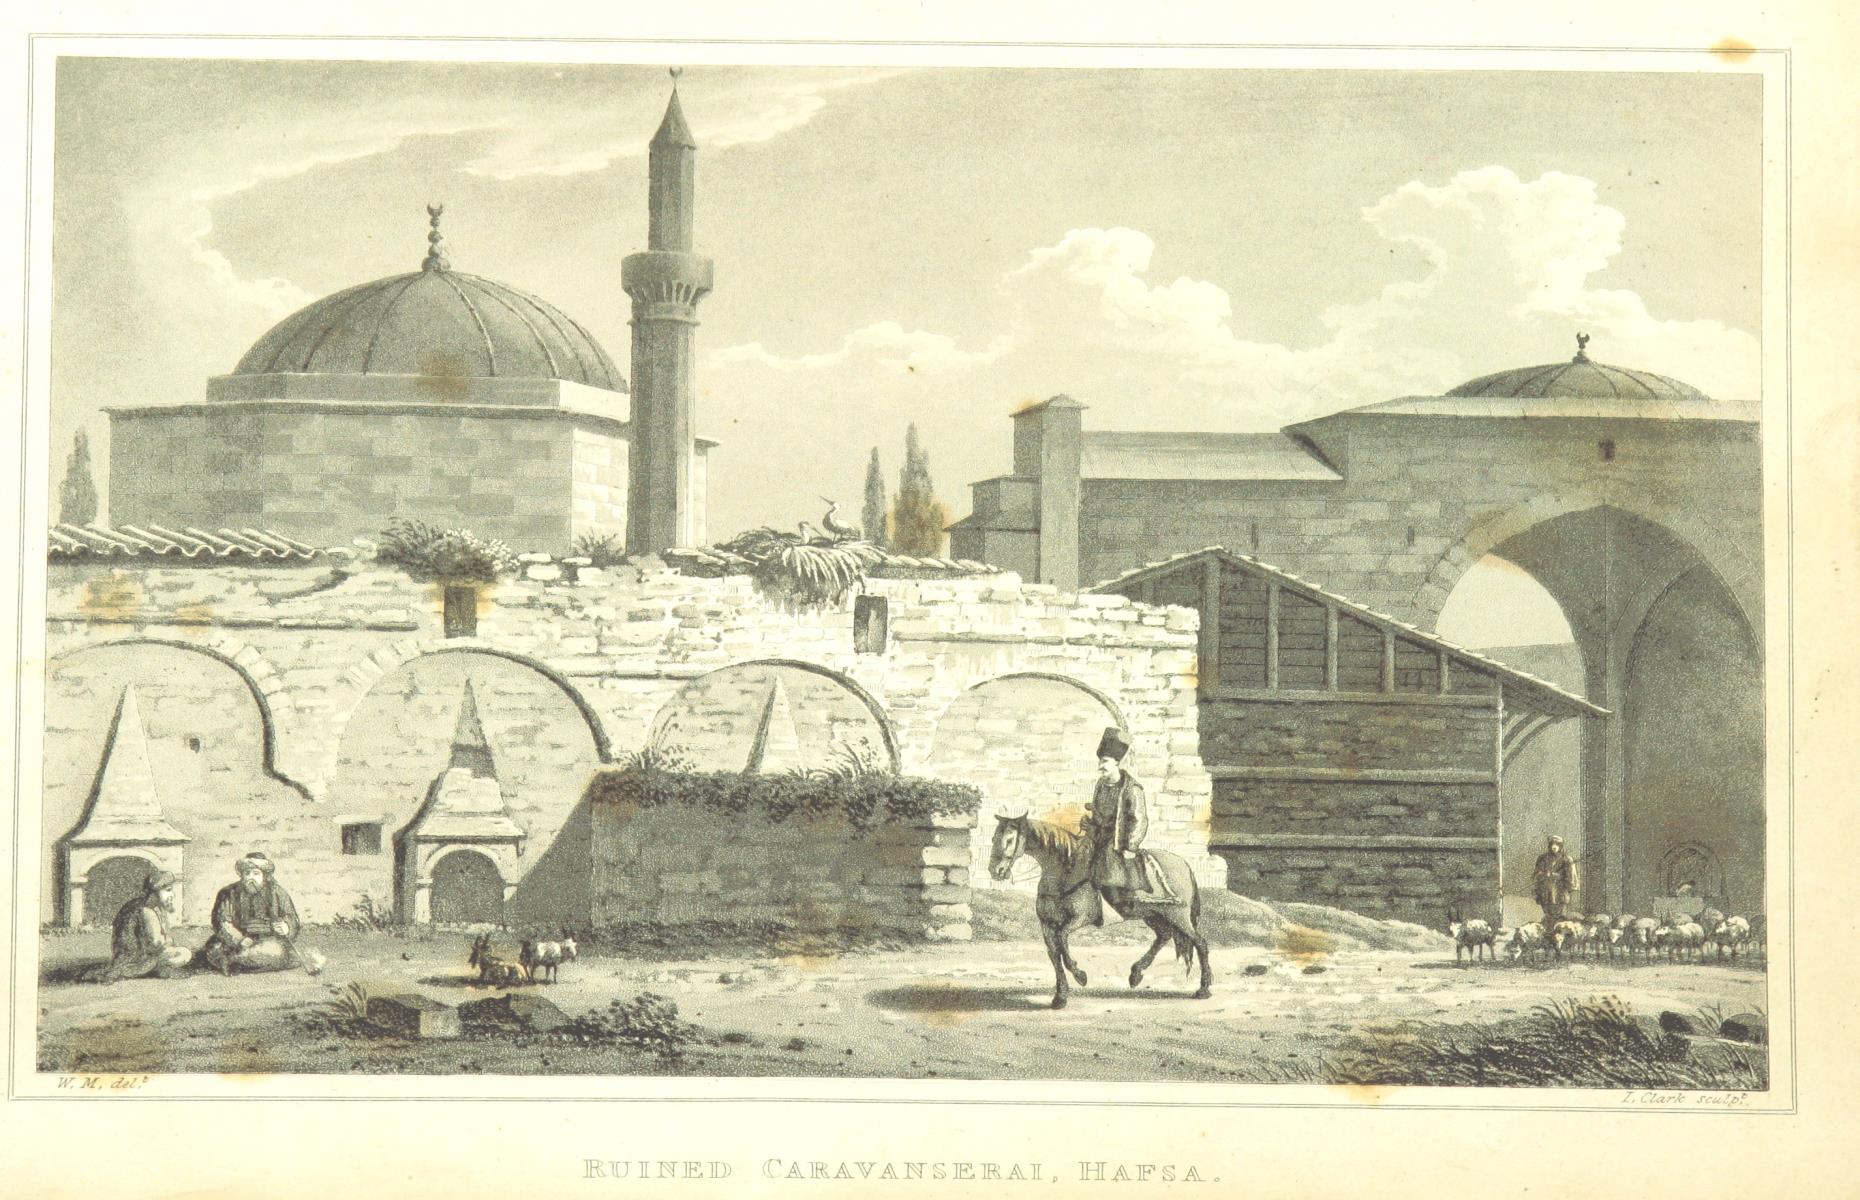 The Silk Road, a network of trade routes from Cairo and Constantinople to Chang’an in modern-day China, connected merchants, porters, and translators. By the 14th century, guidebooks were written about the journey, and caravanserais – roadside inns where travelers could rest – popped up along the route.